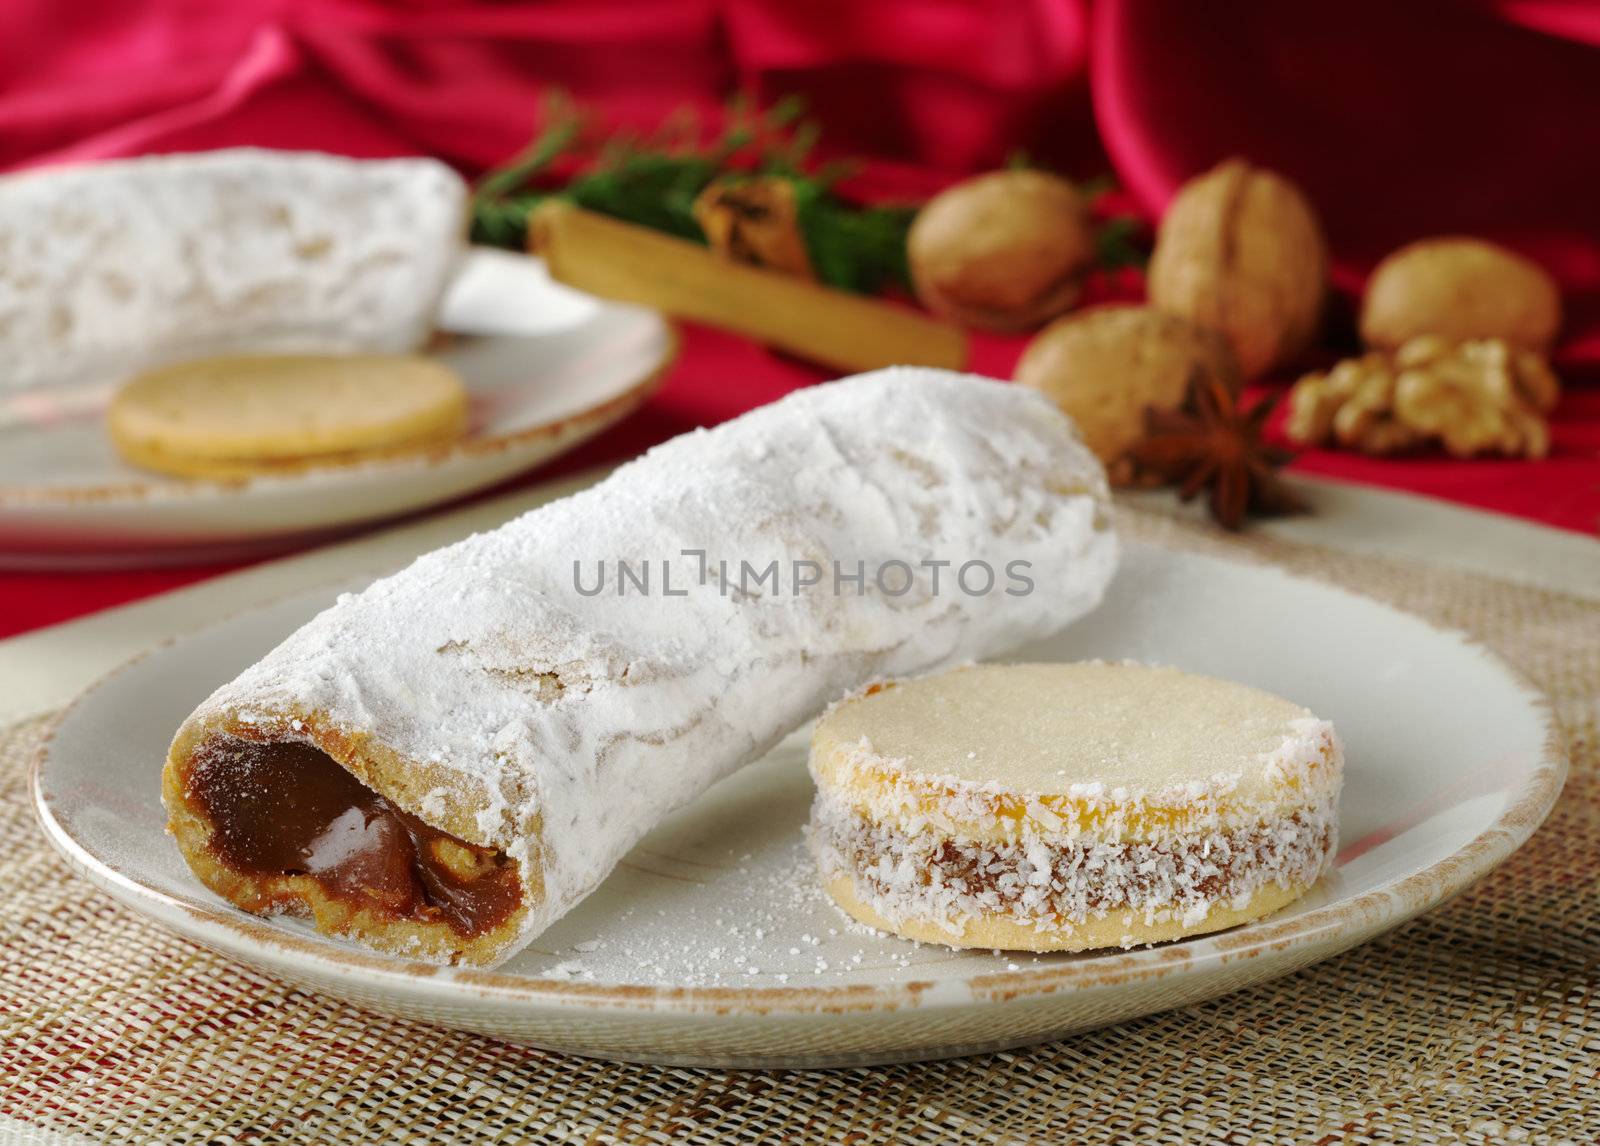 Peruvian cakes filled with a caramel-like cream called Manjar: the long one is called Guarguero, the round one is called Alfajor (Selective Focus, Focus on the front of the two cakes)